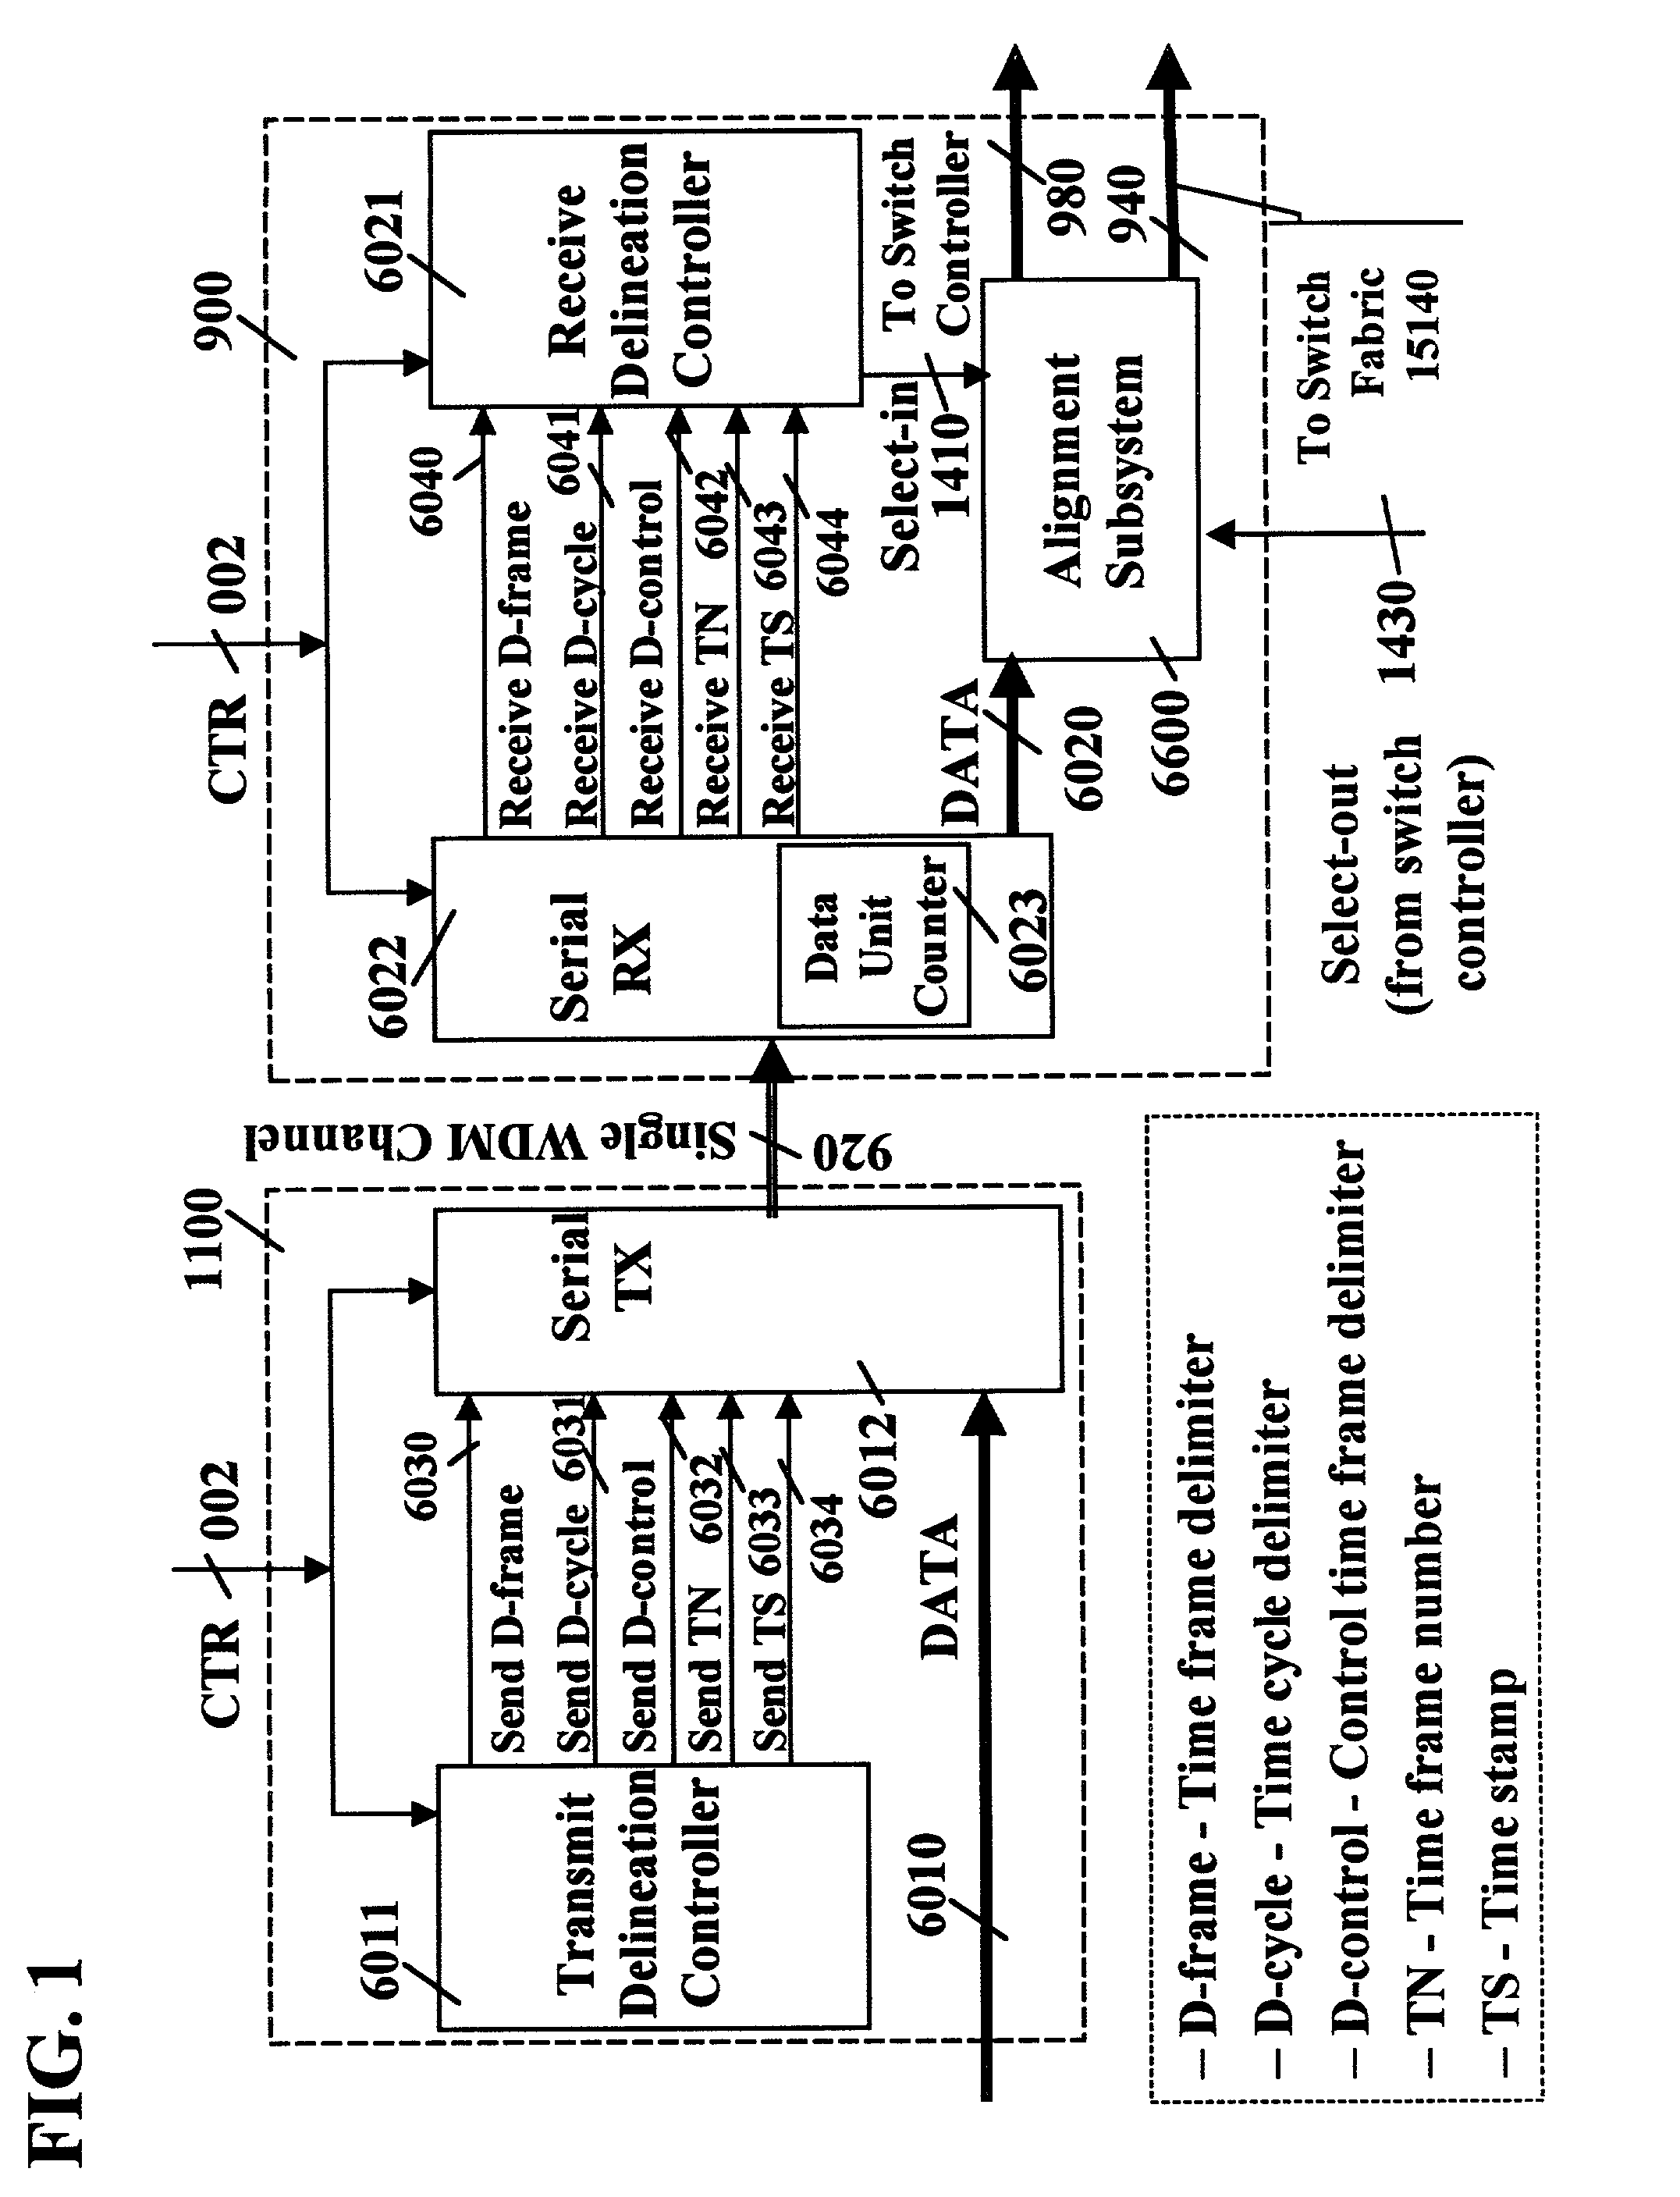 Link transmission control with common time reference